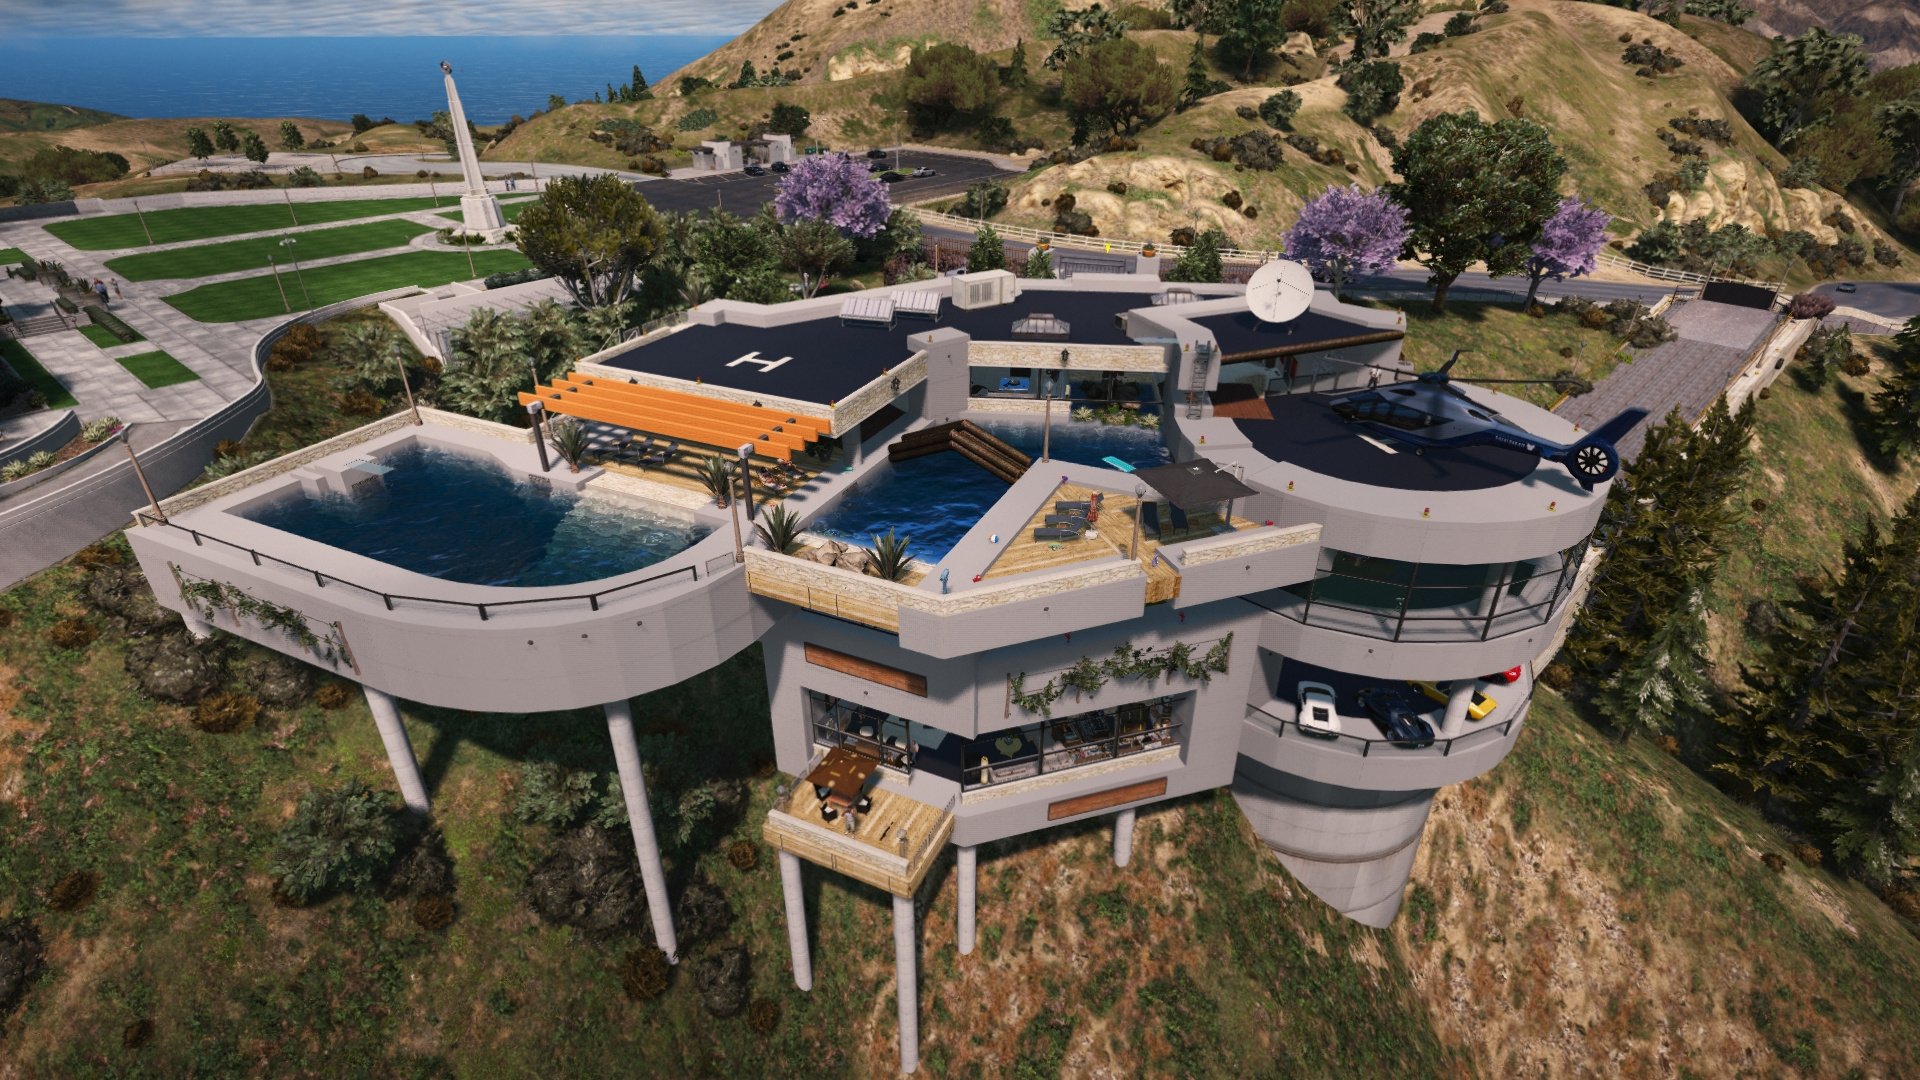 All the houses in gta 5 фото 3